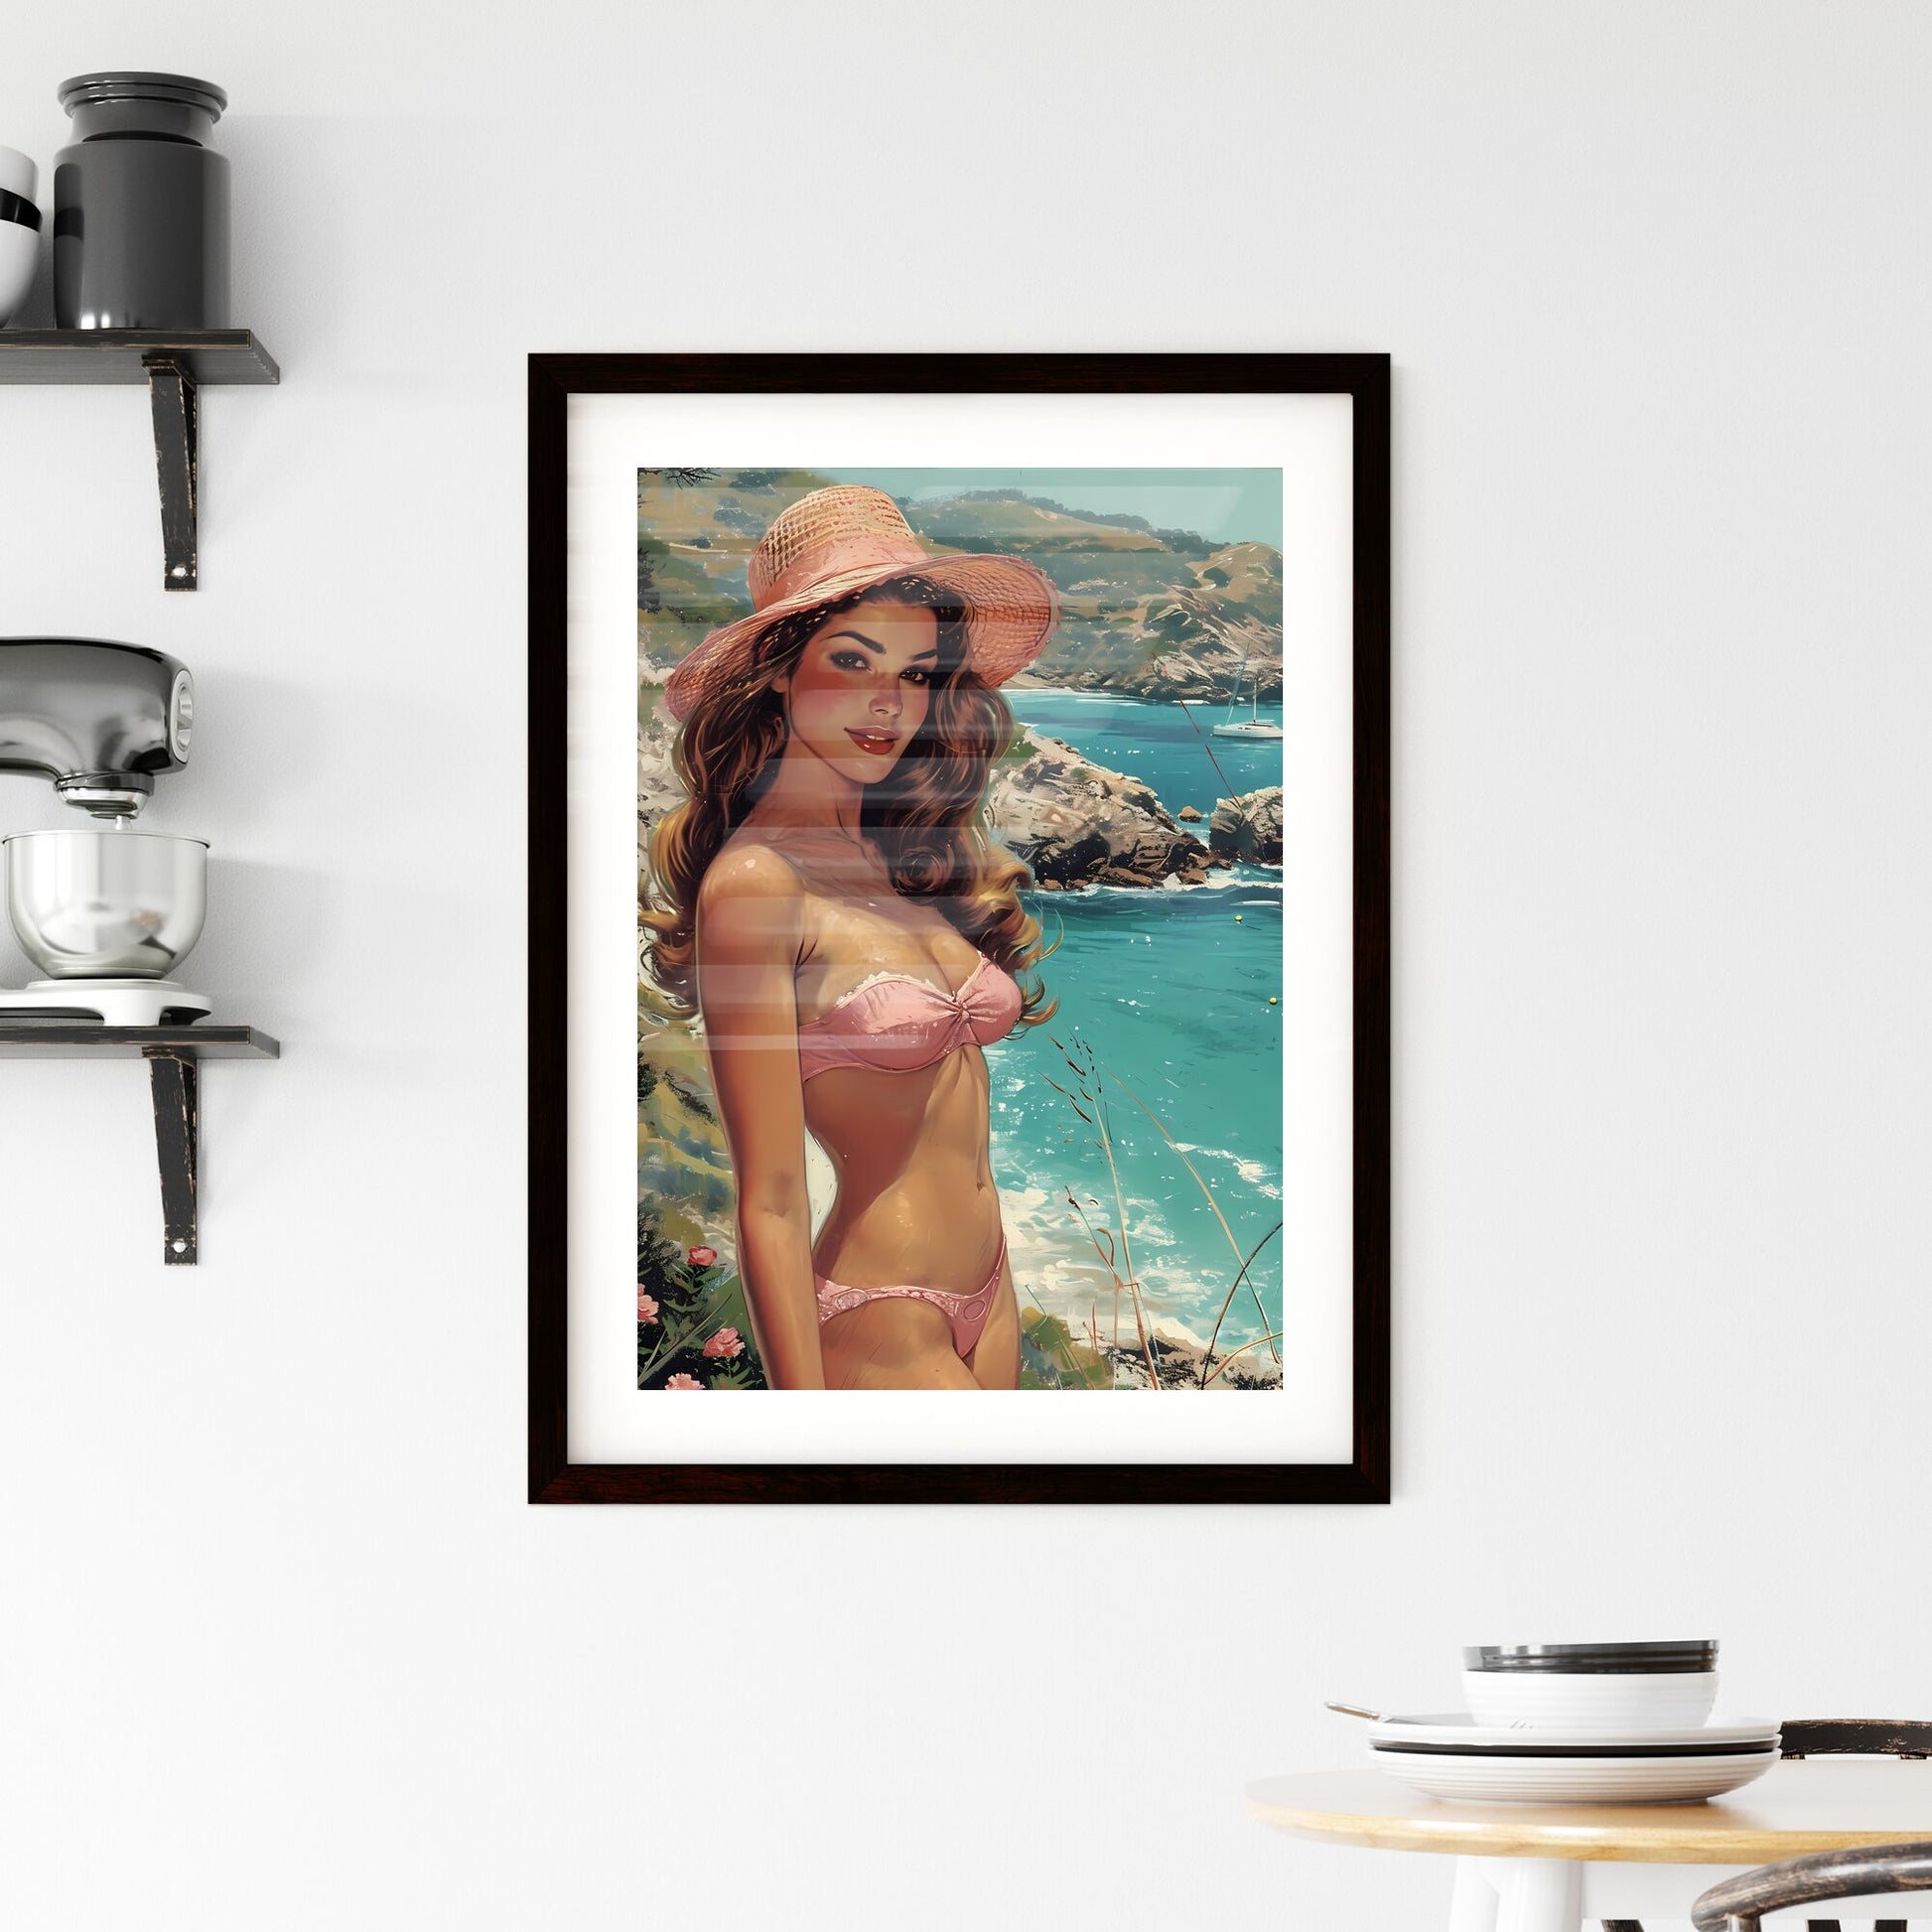 Sea Print, Coastal Painting - Art print of a woman in a garment and hat standing on a beach Default Title